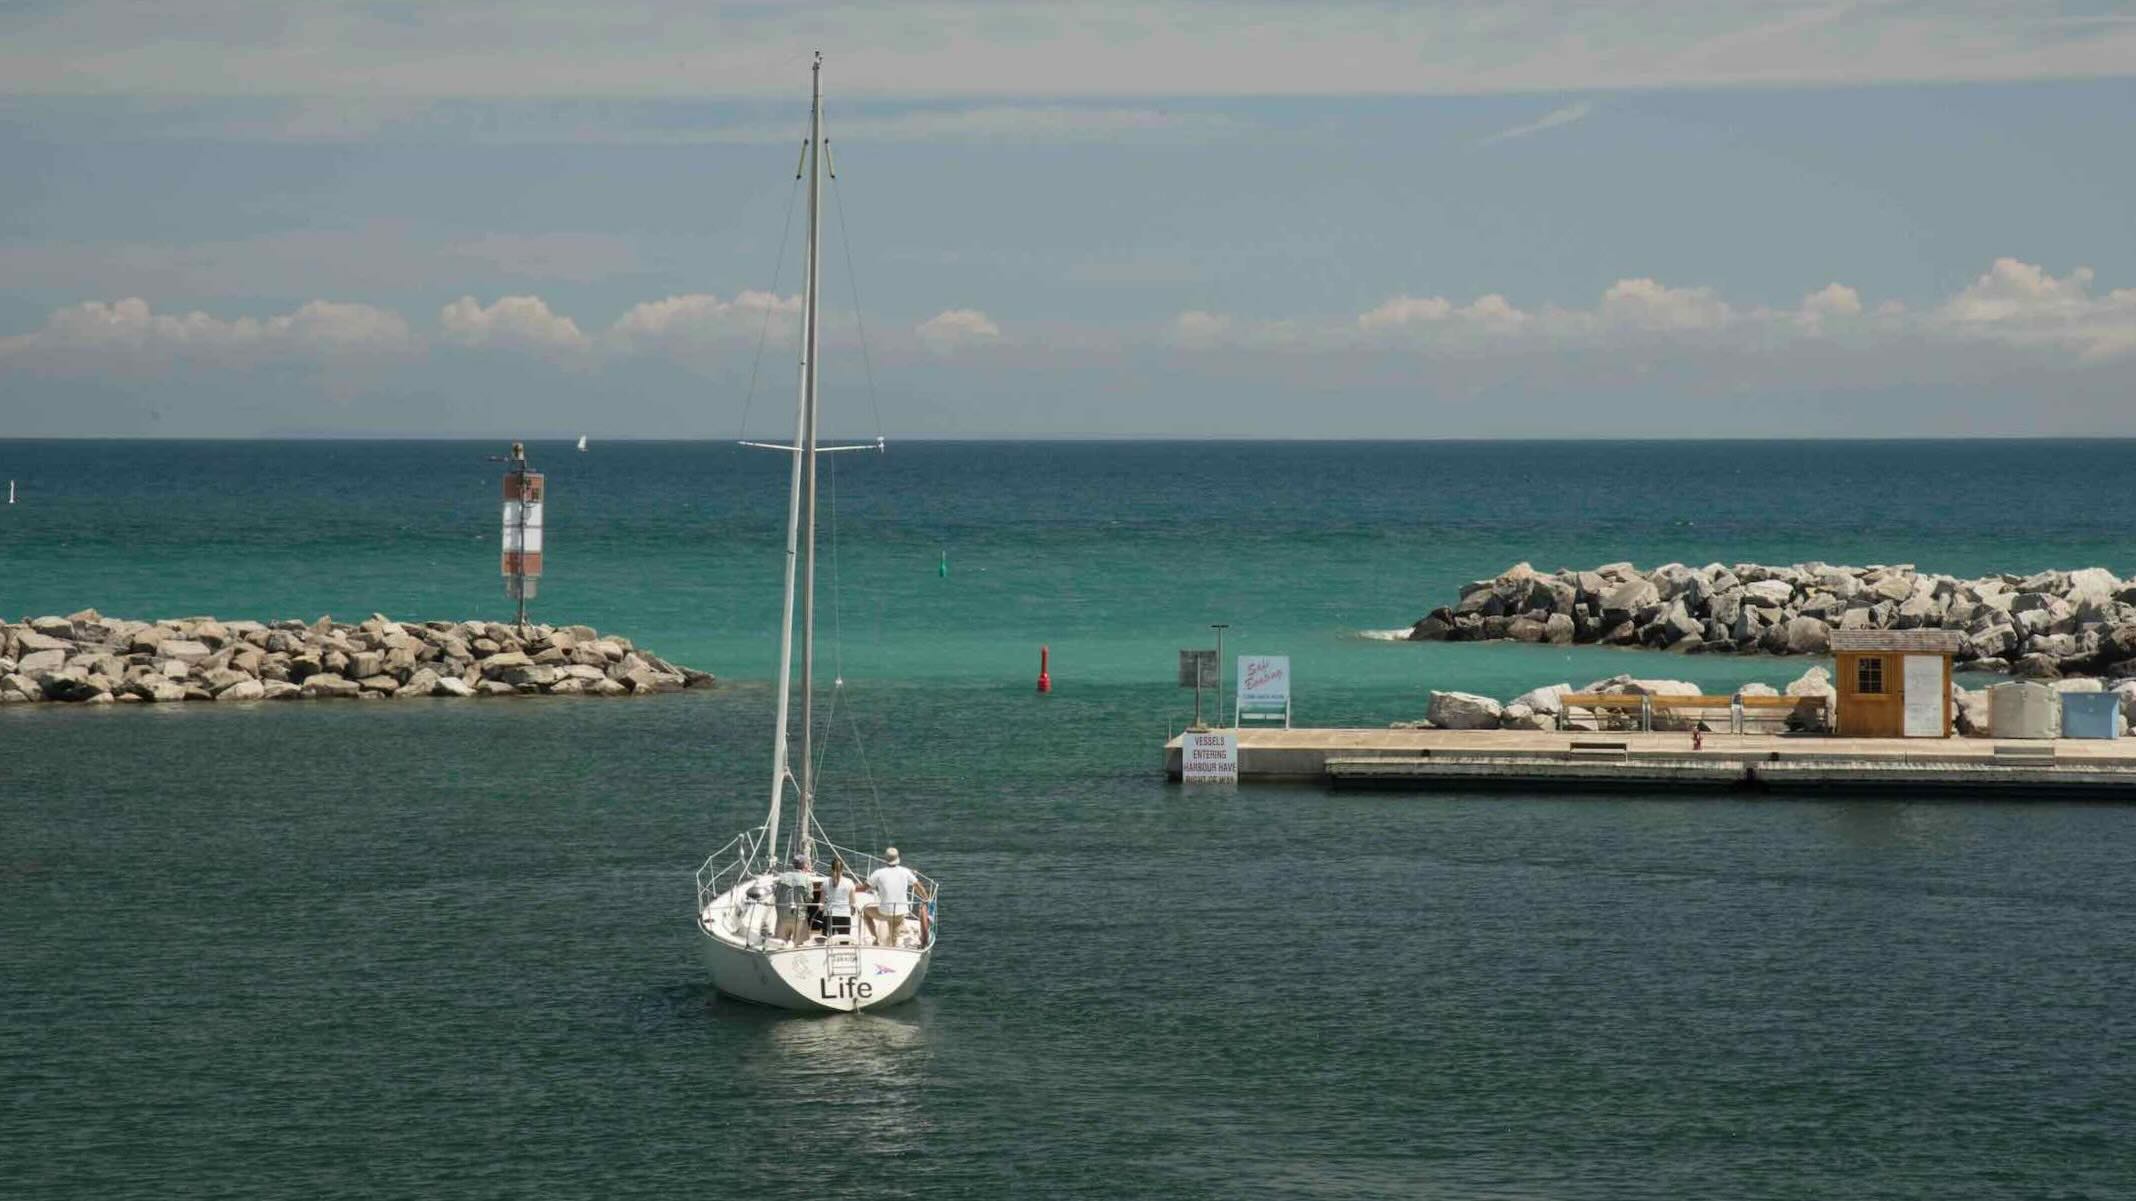 Sailing is one of the top things to do in Thornbury, as this picture shows a boat heading out to Georgian Bay copy